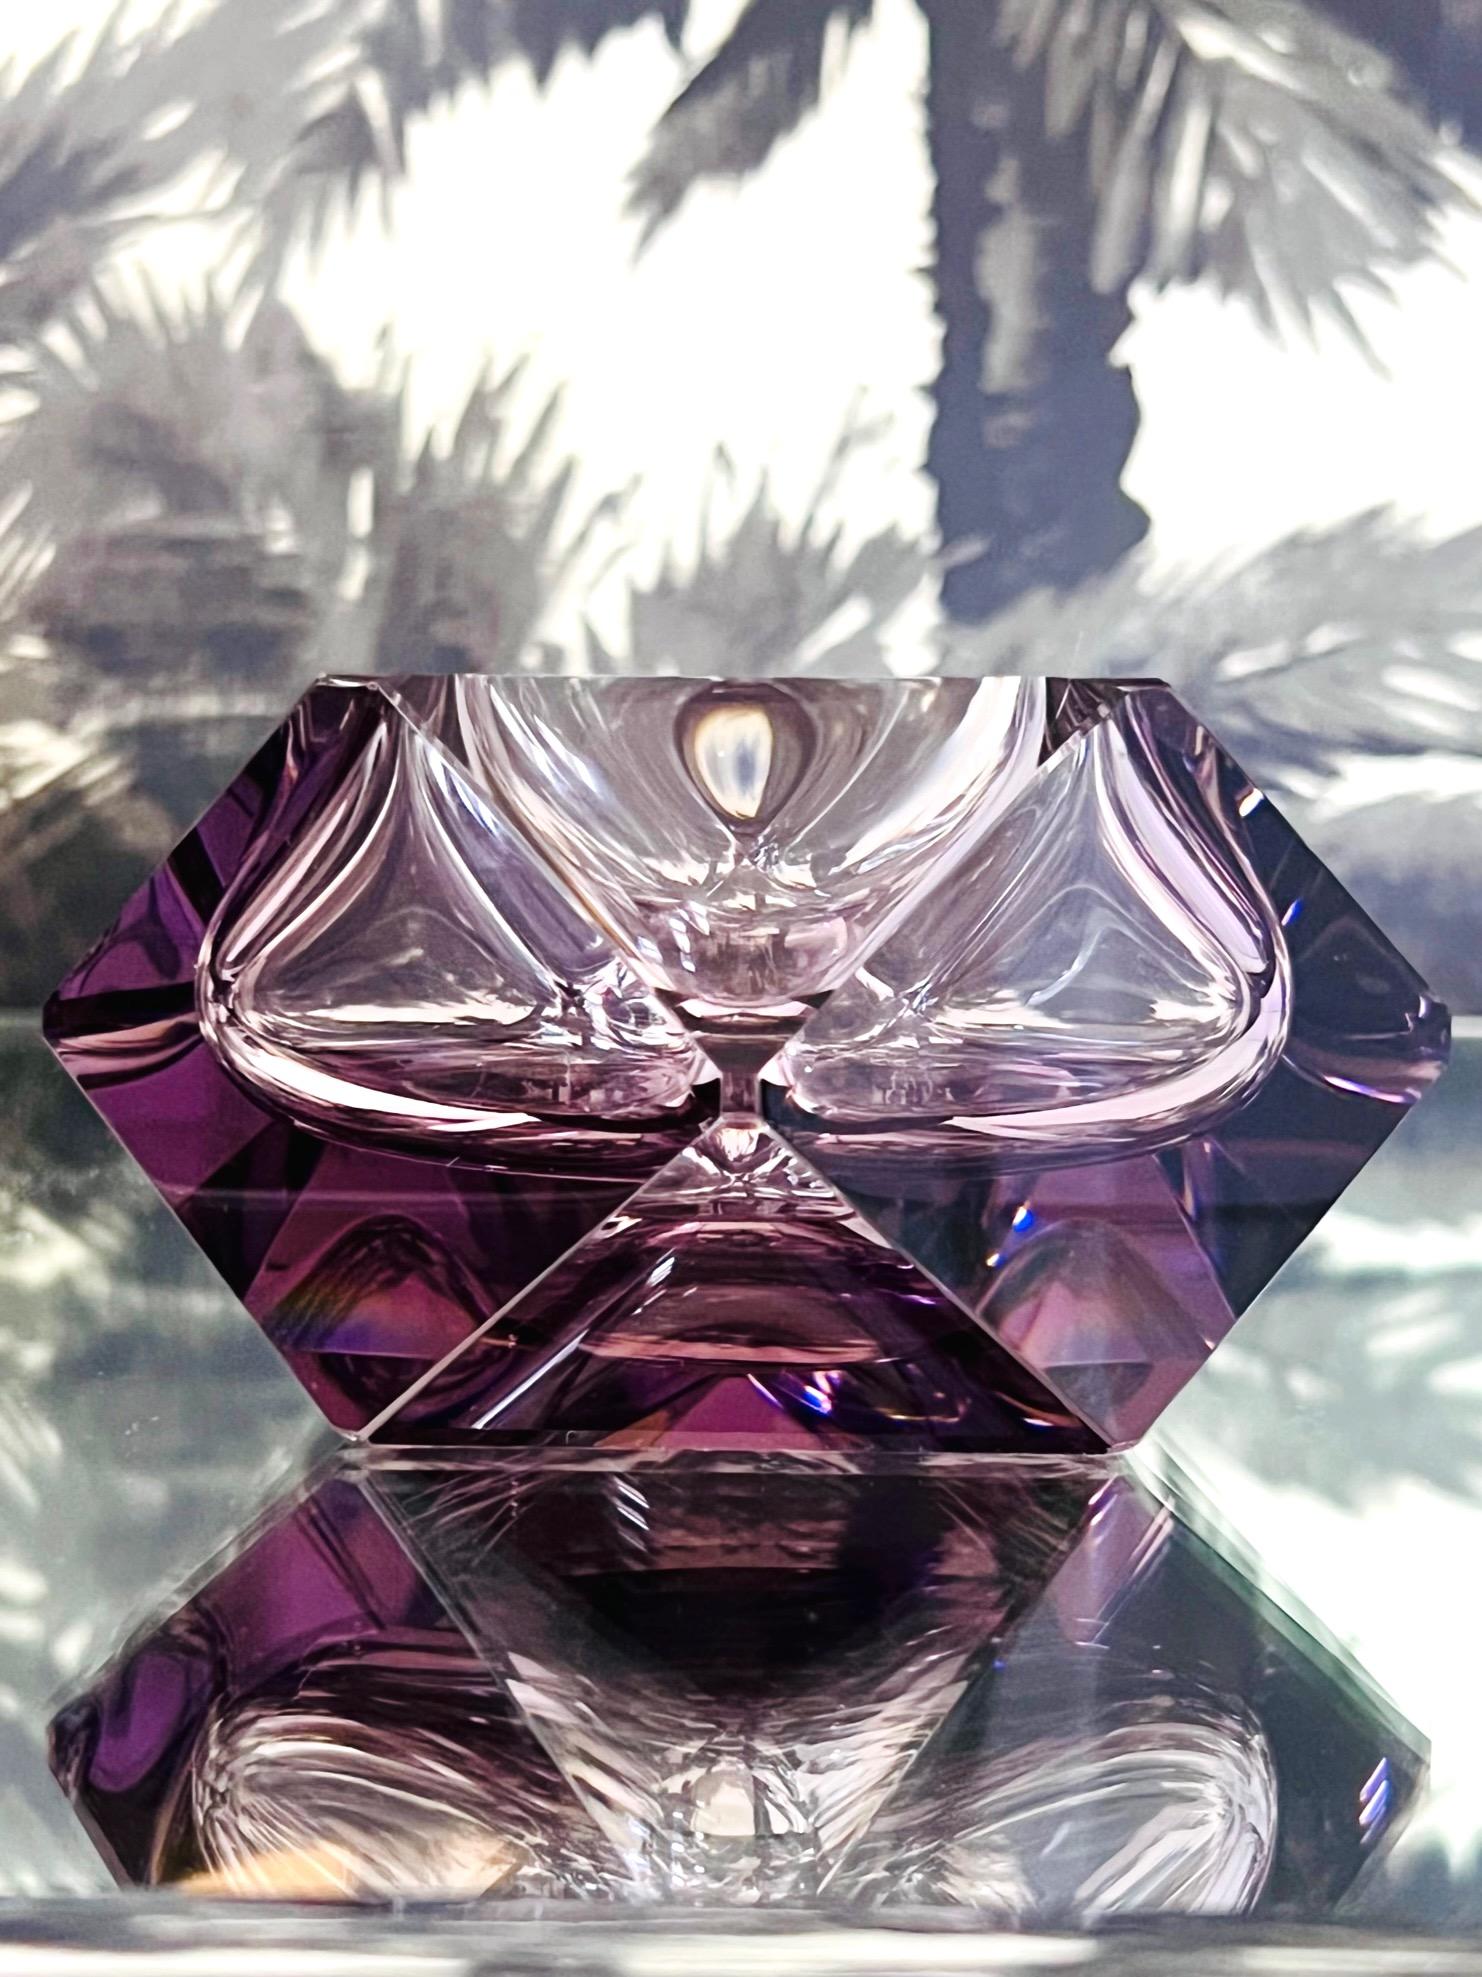 Mid-Century Modern Faceted Murano Glass Ashtray in Purple Amethyst by Flavio Poli, c. 1960's